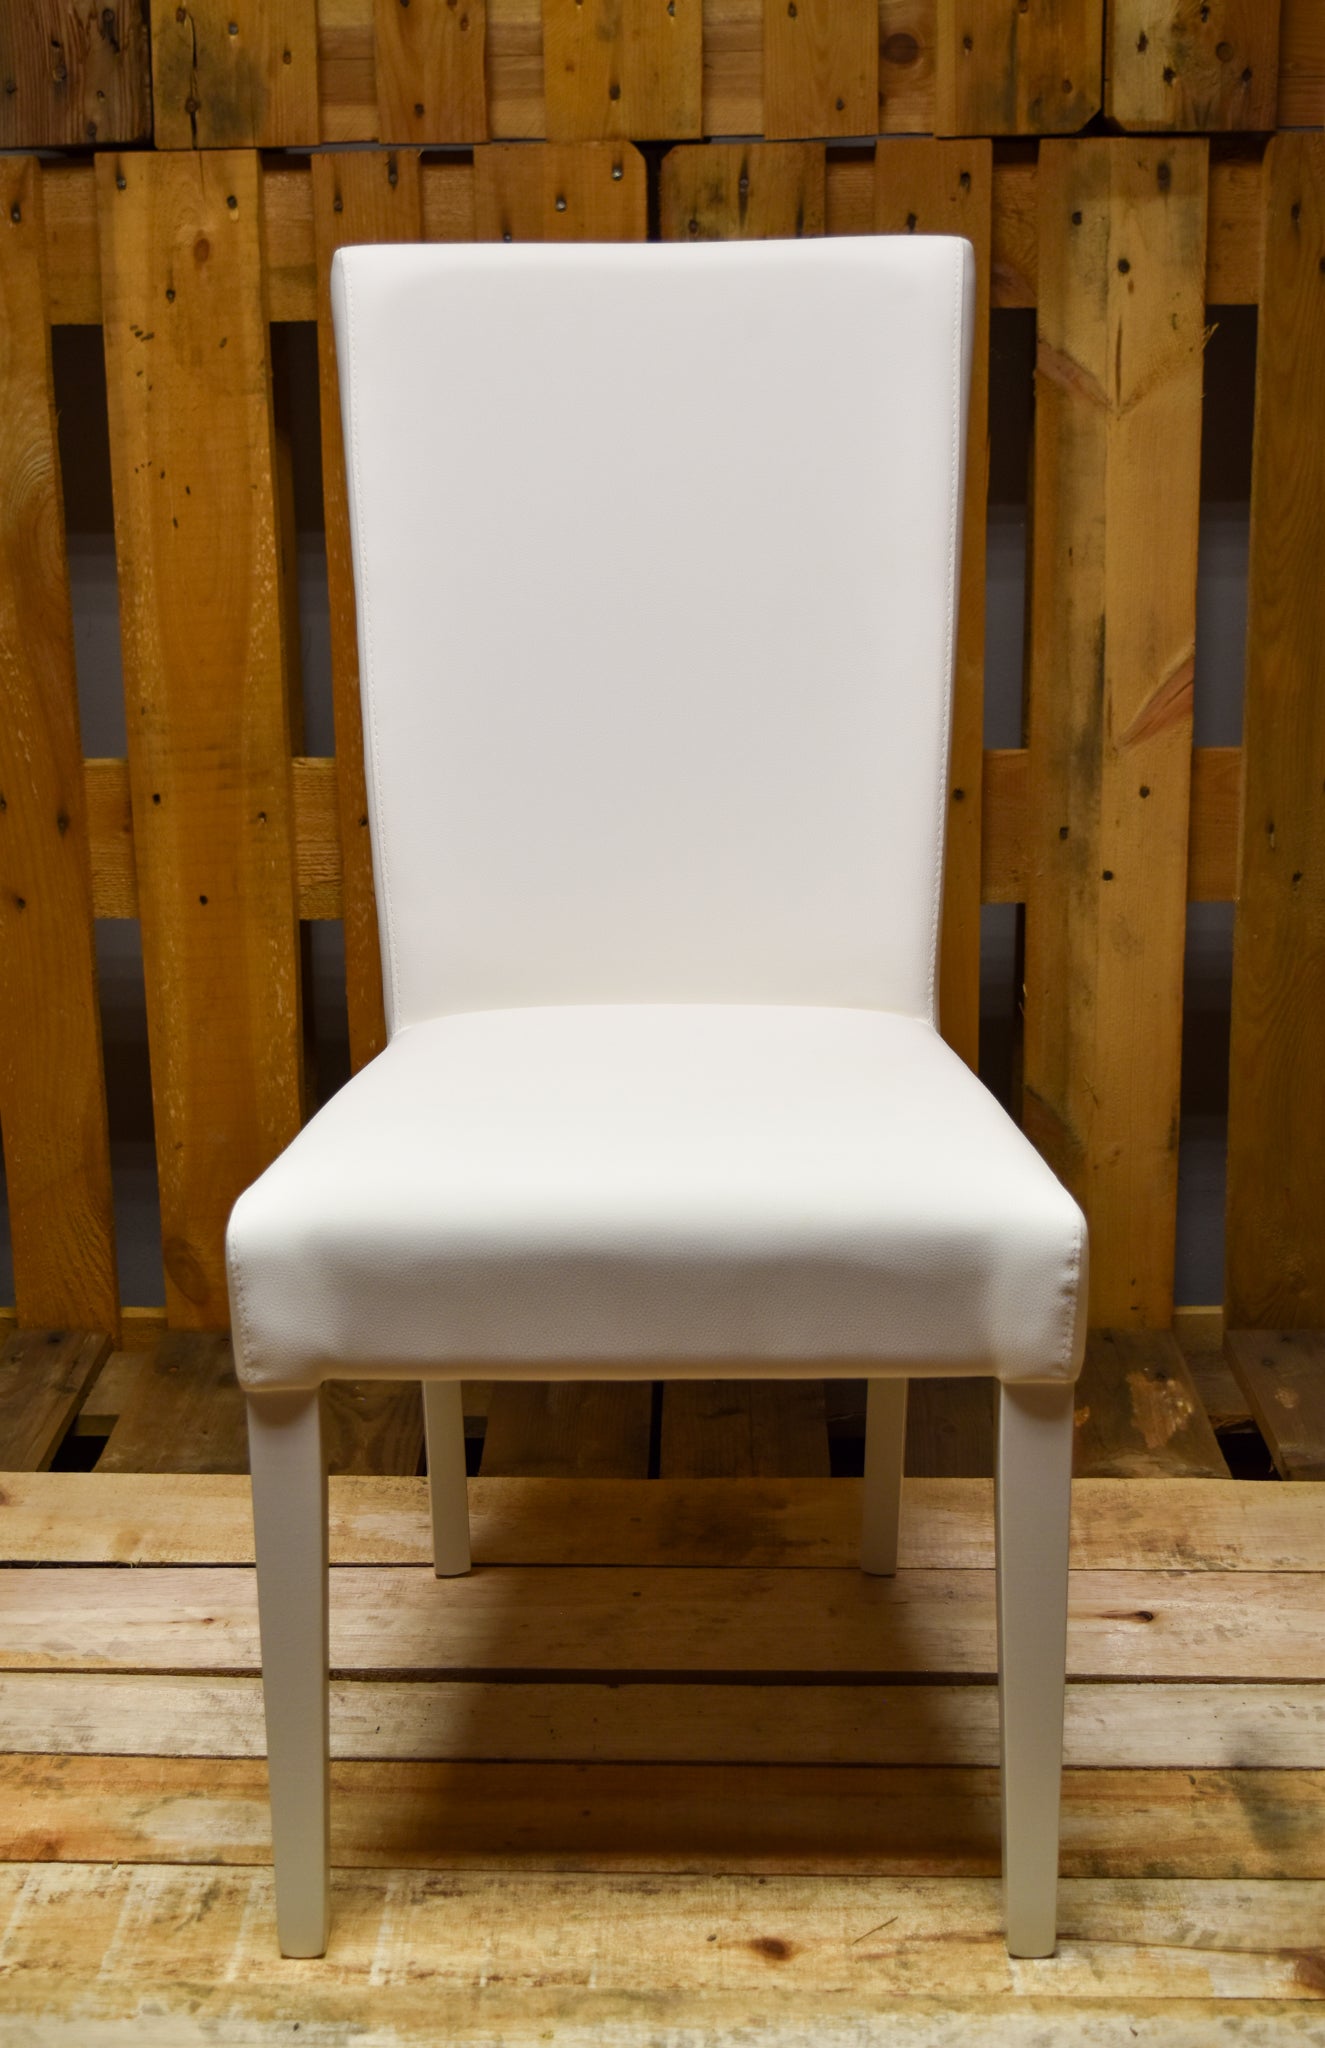 Stock model 46 white padded chairs